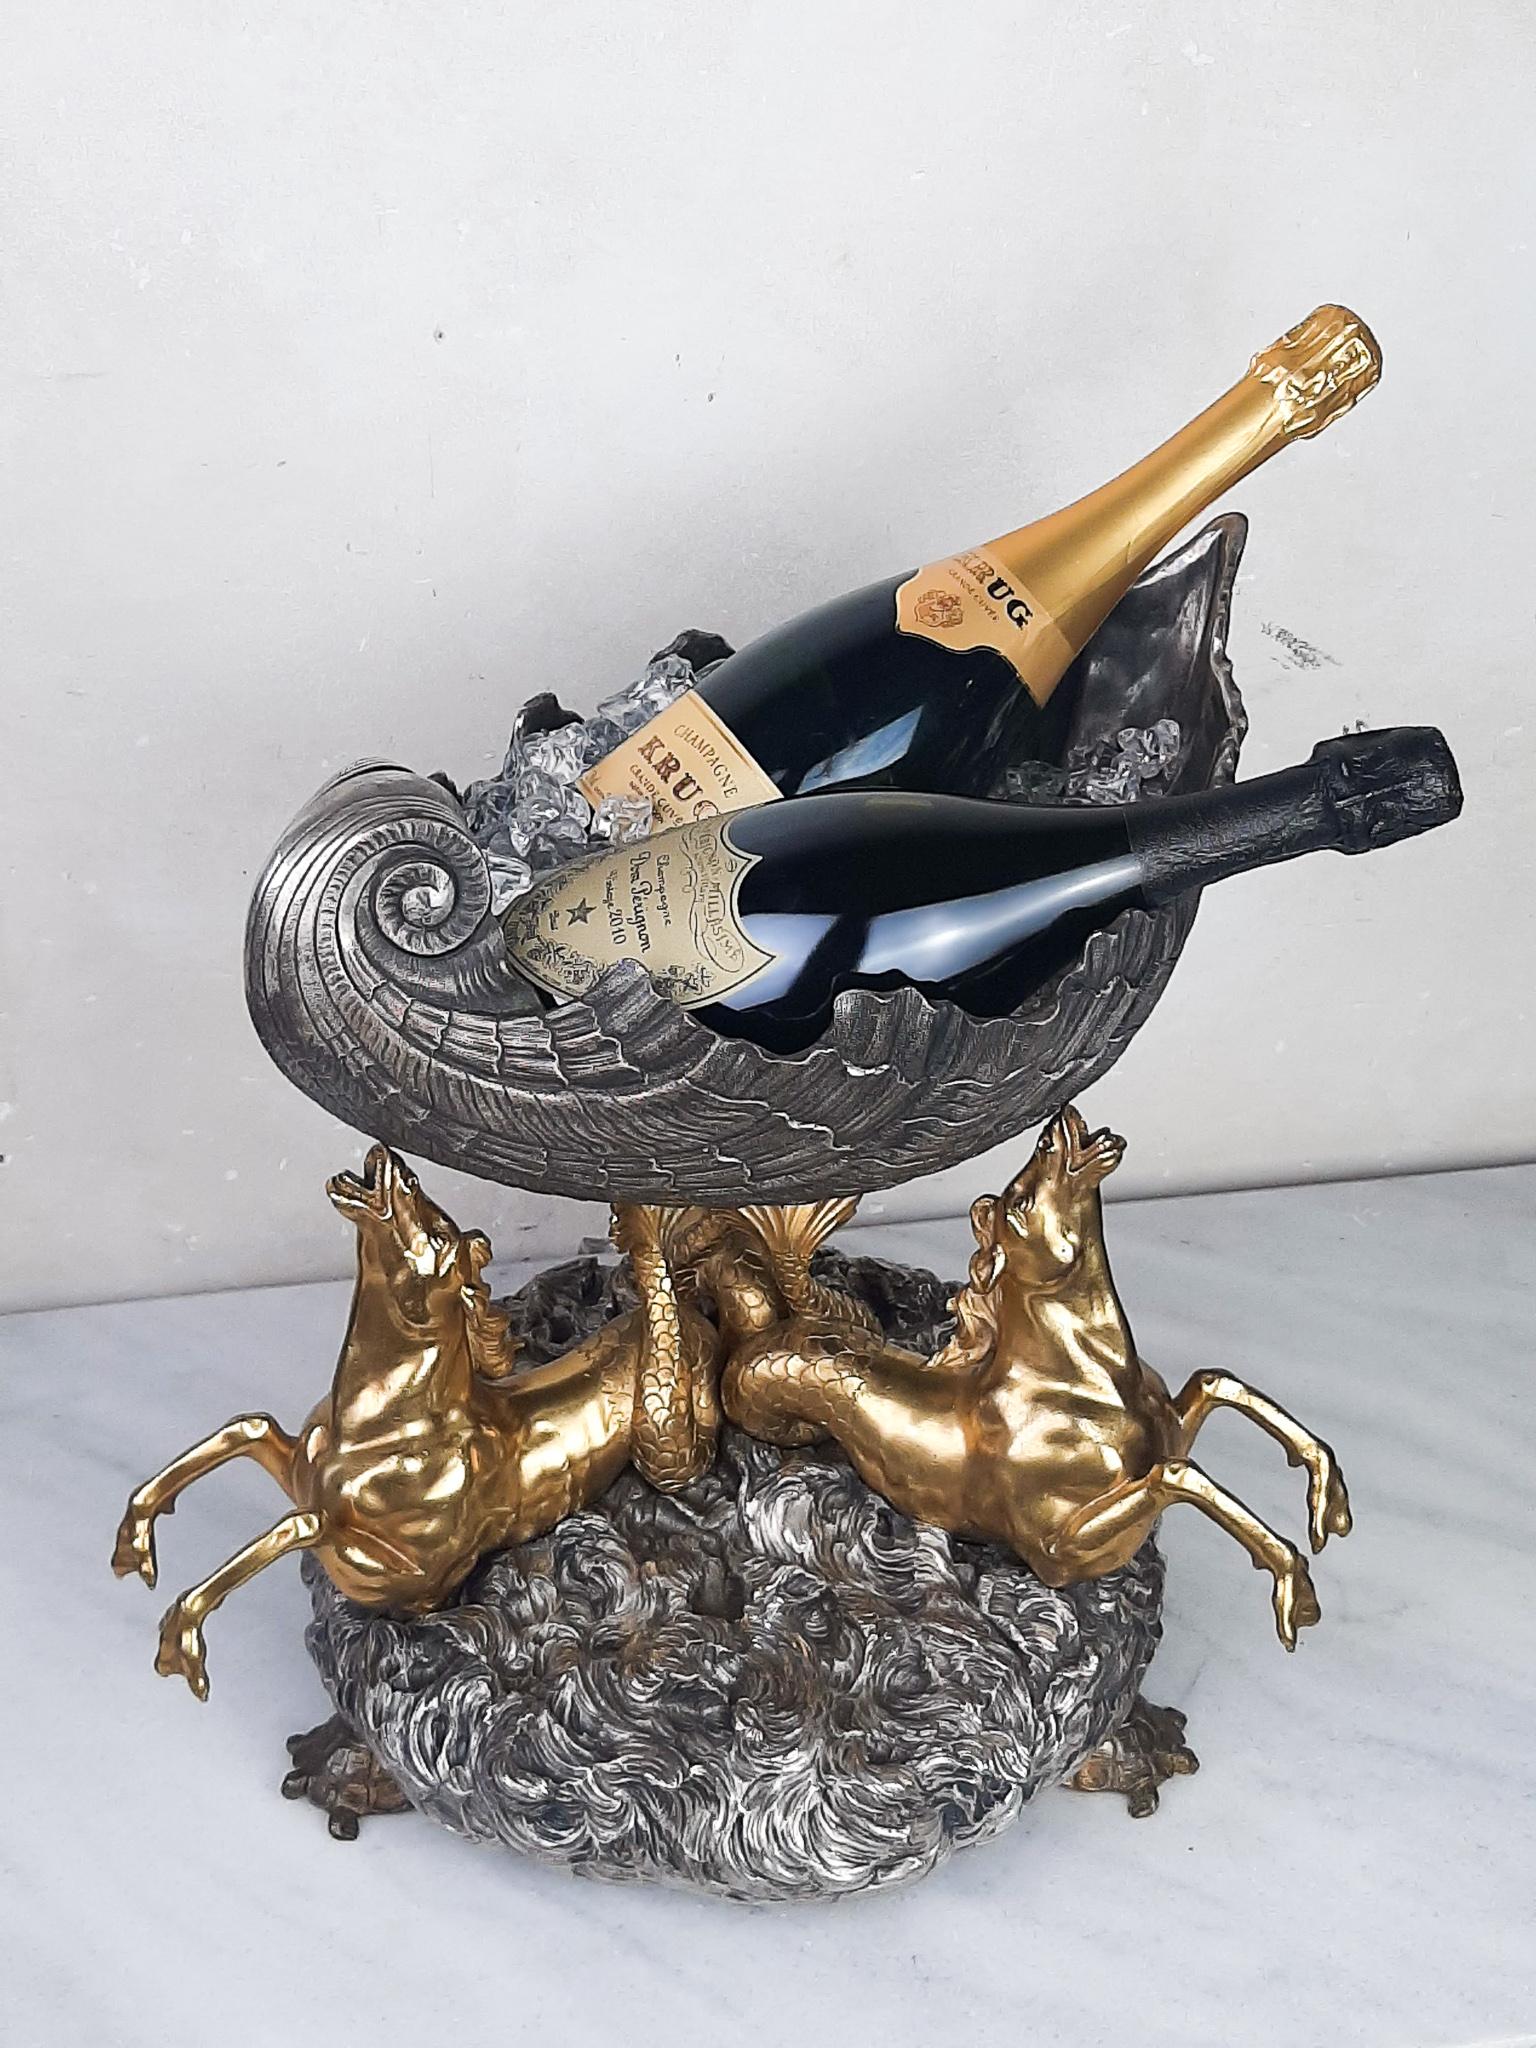 19th century bronze centre piece Venus shell champagne cooler. This imposing and heavy table piece (Surtout a table) is a made of silver plated and gilt bronze. The large Venus Shell (that easily holds 2 bottles) is supported by fine gilt bronze